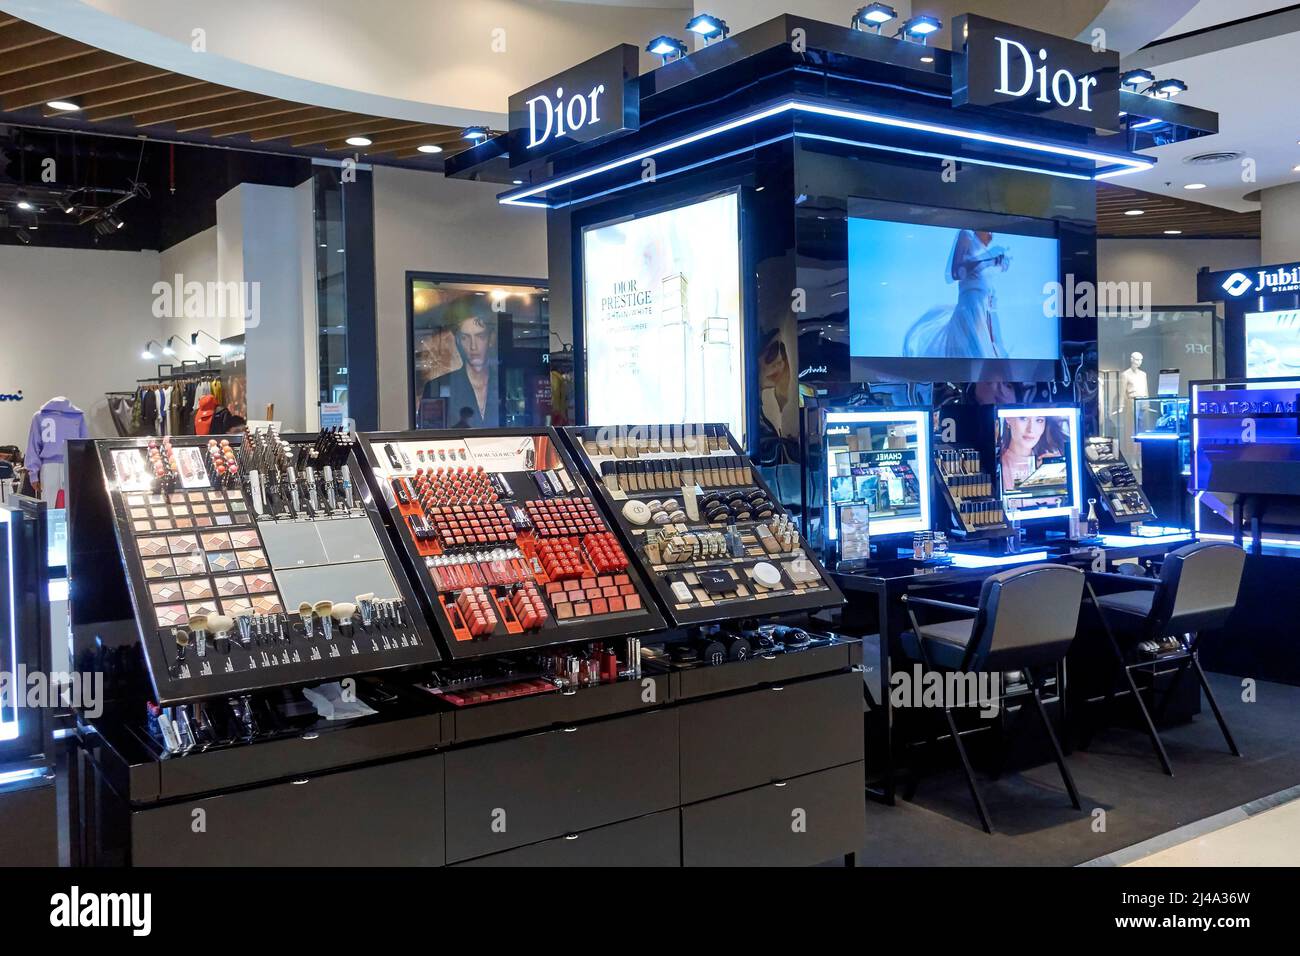 Dior makeup counter and beauty department Stock Photo